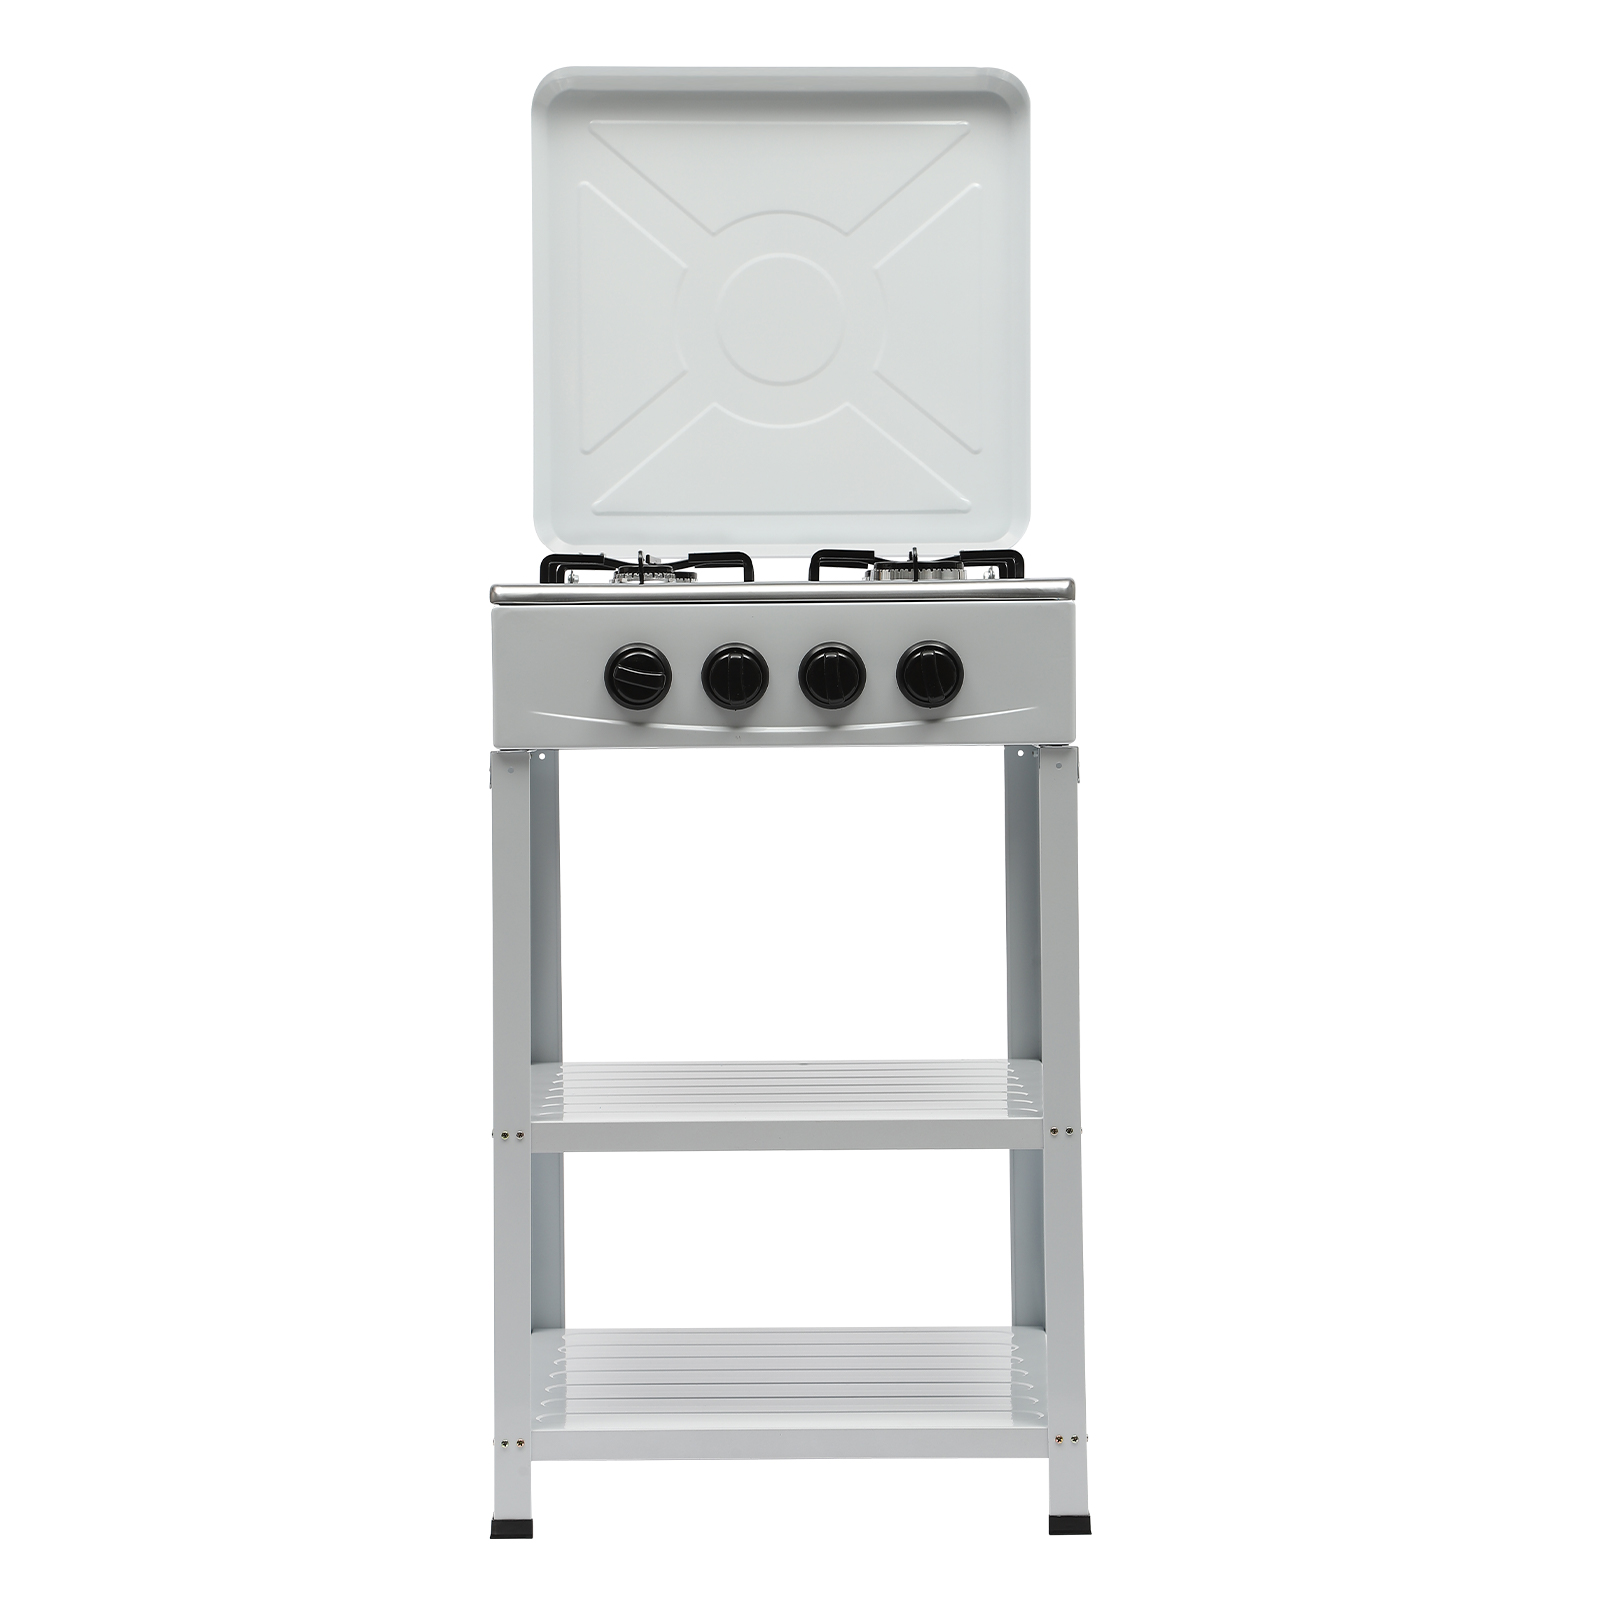 Oukaning 4 Burner Gas Stove with Support Leg Stand and Wind Blocking Cover Camping Stove for RV, Home ,Outdoor Cooking (White) - image 2 of 13